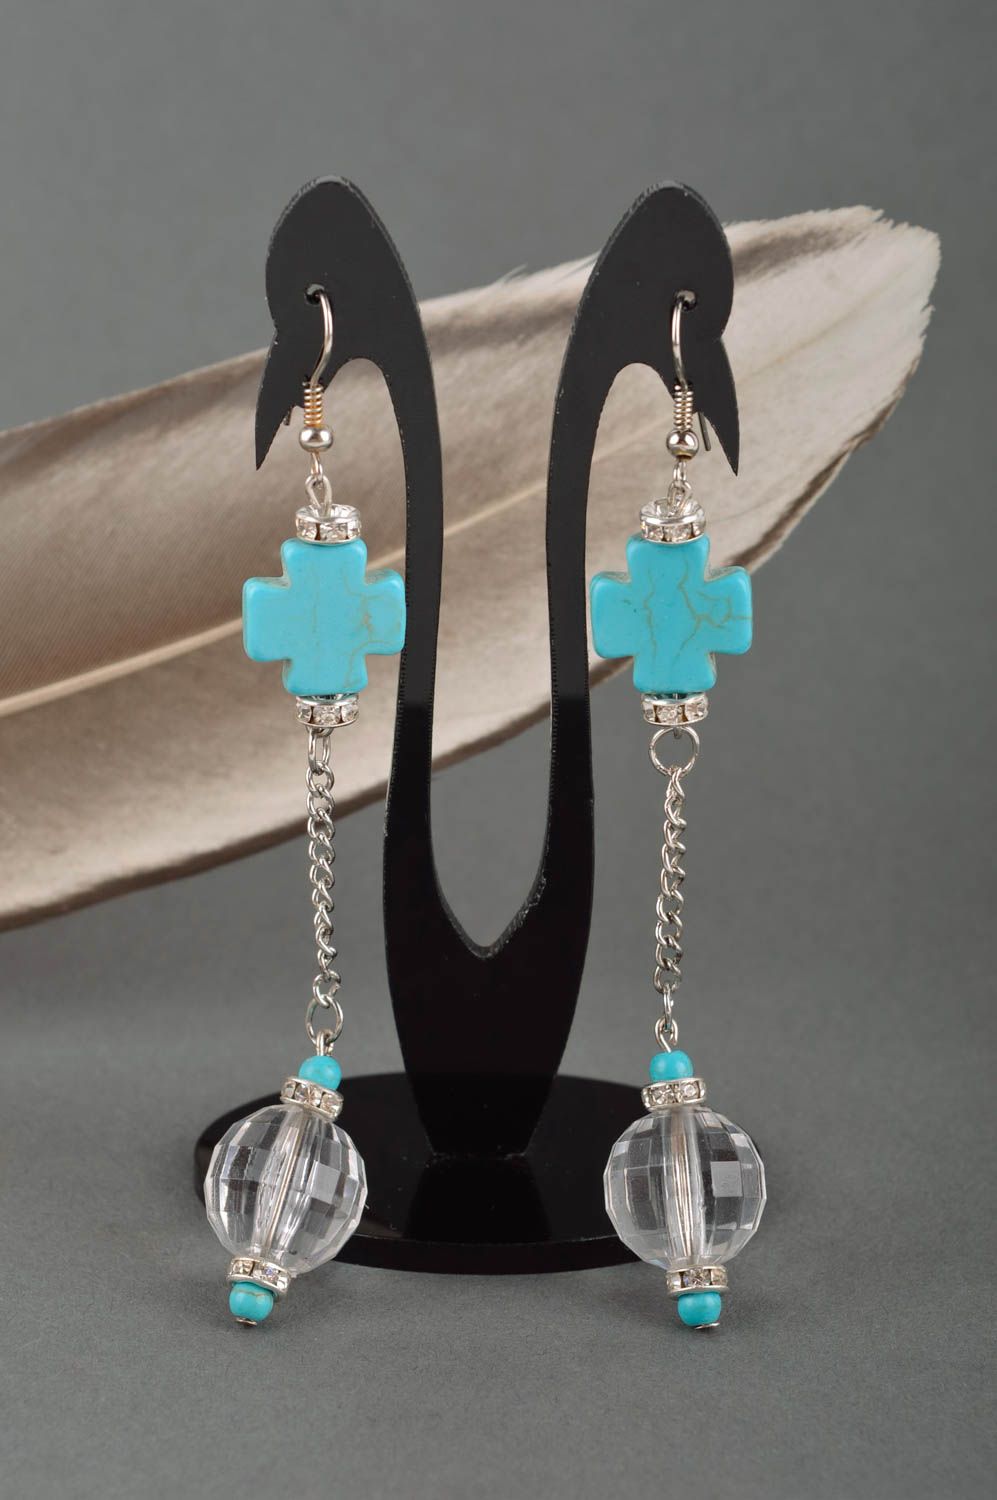 Handmade earrings with turquoise long earrings with charms evening jewelry photo 1